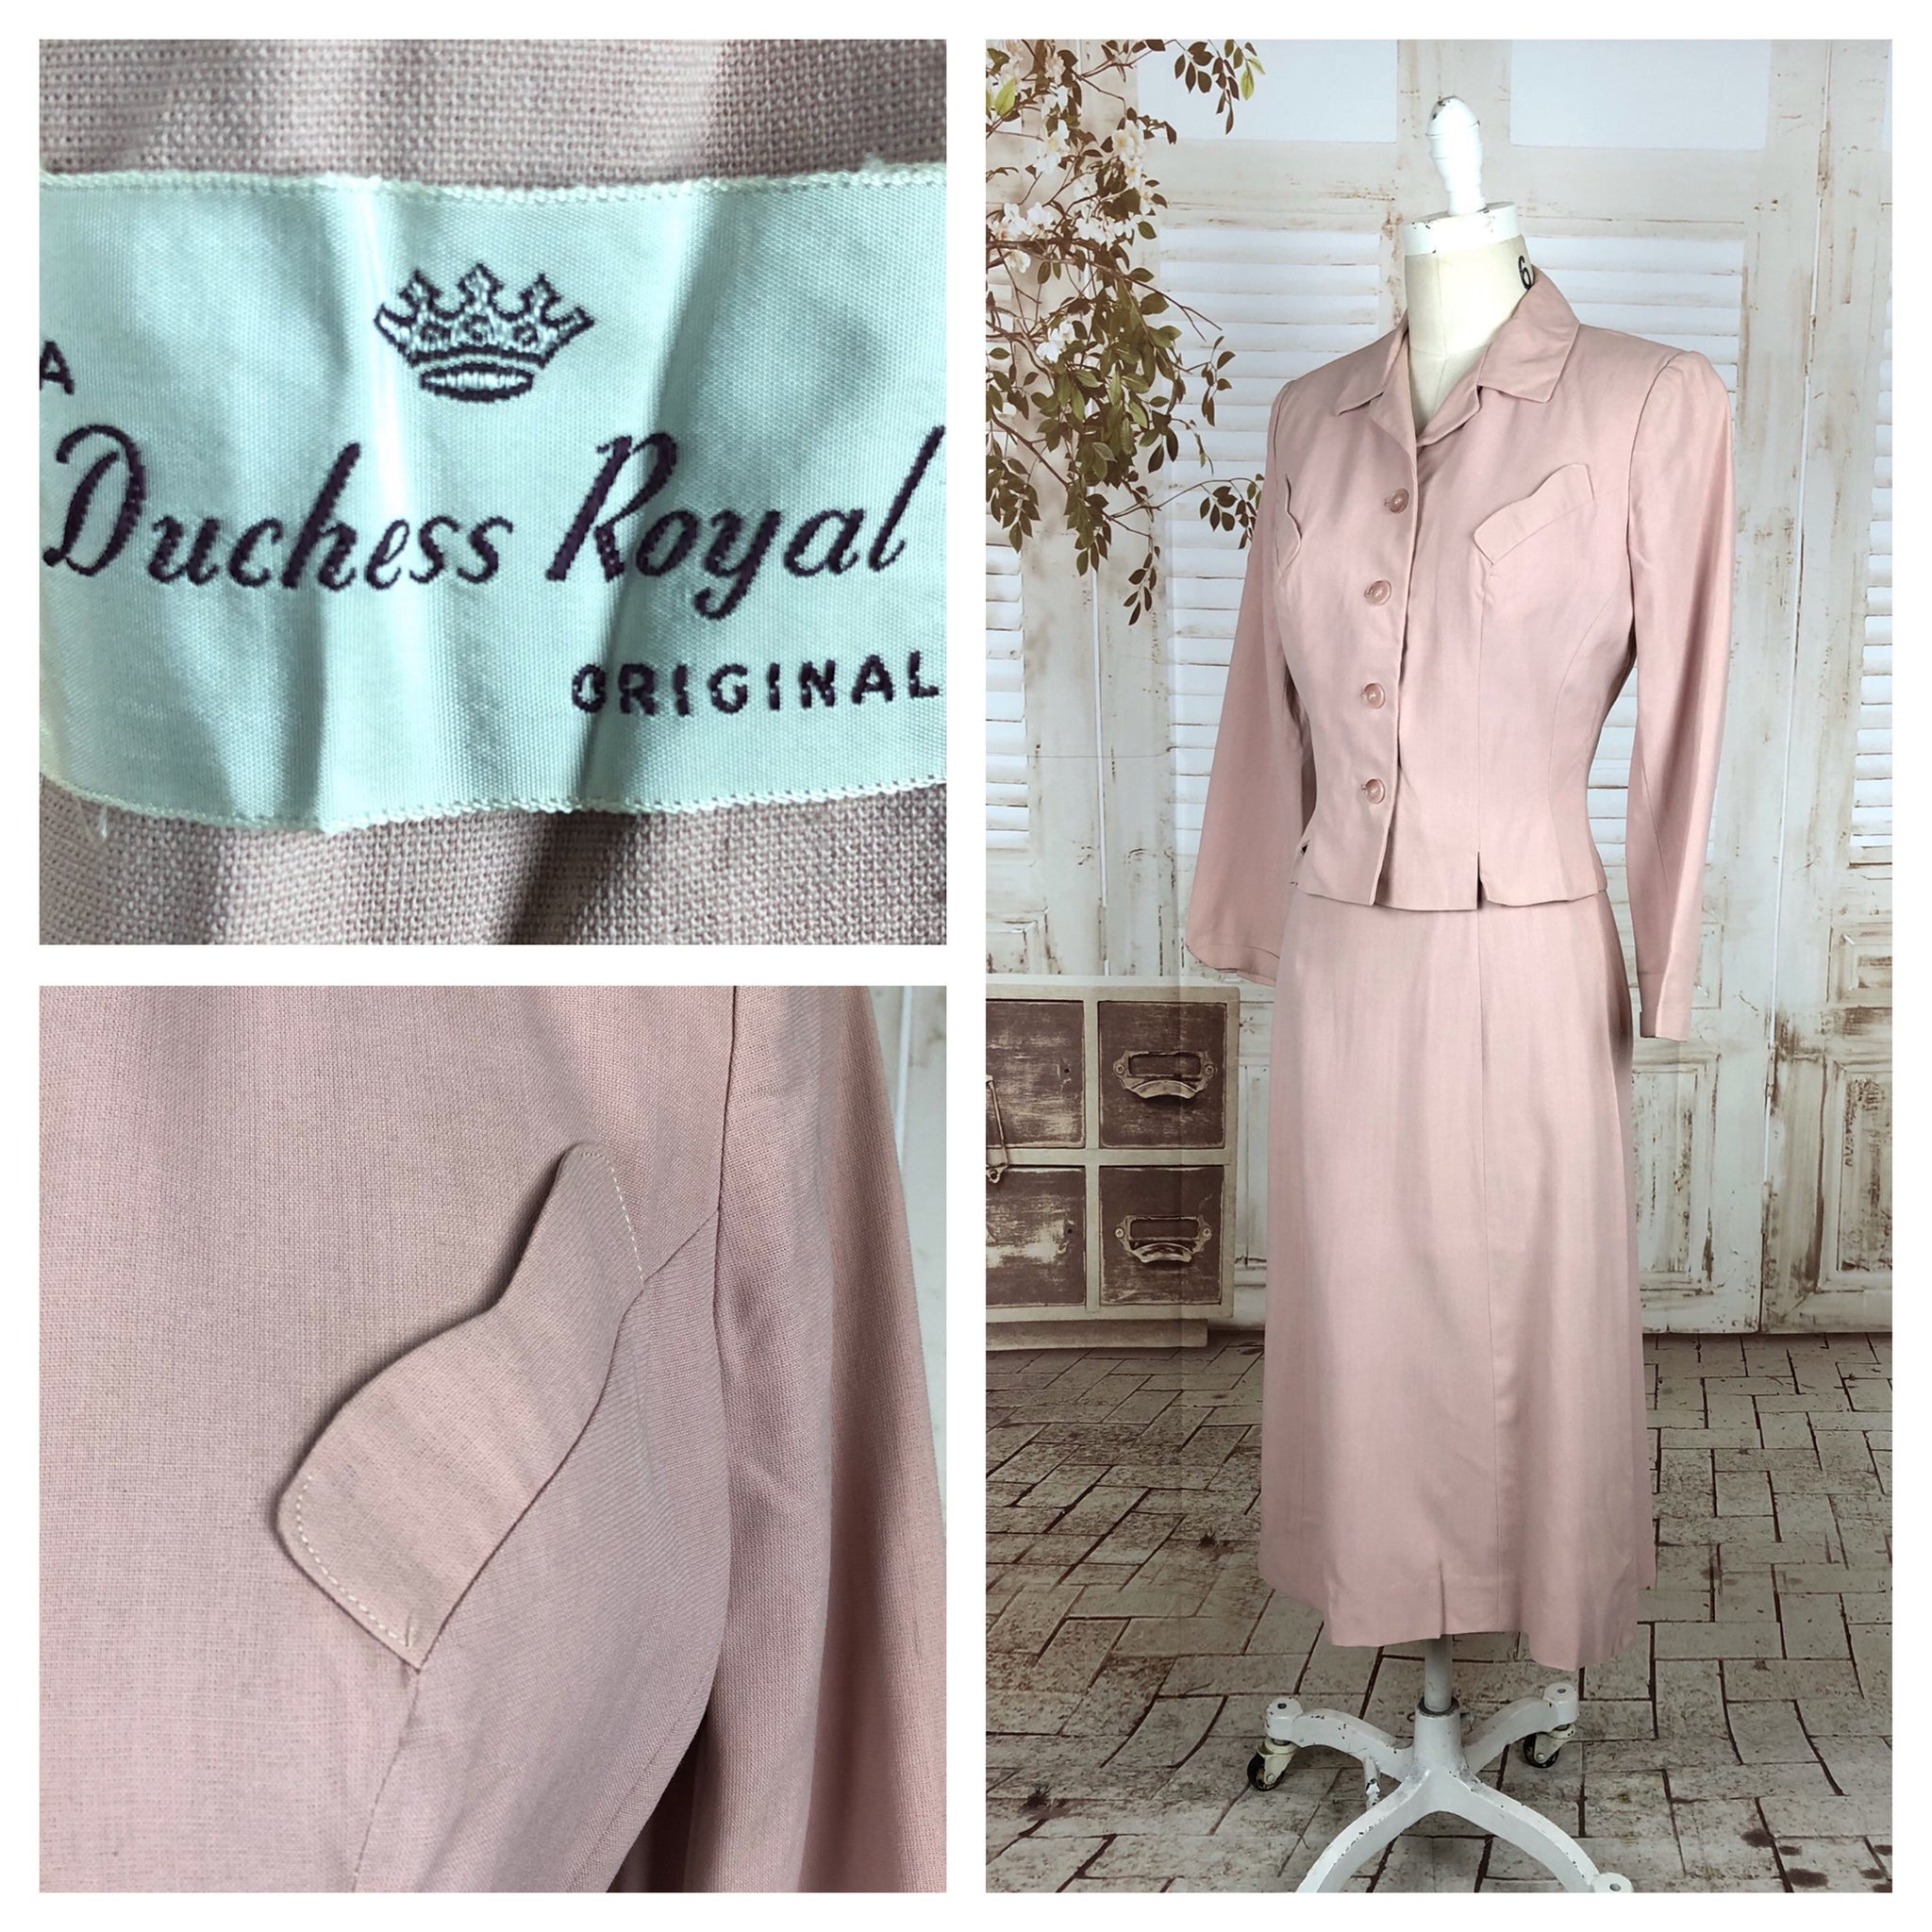 Original 1940s 40s Vintage Pink Starched Cotton Skirt Suit By Duchess Royal